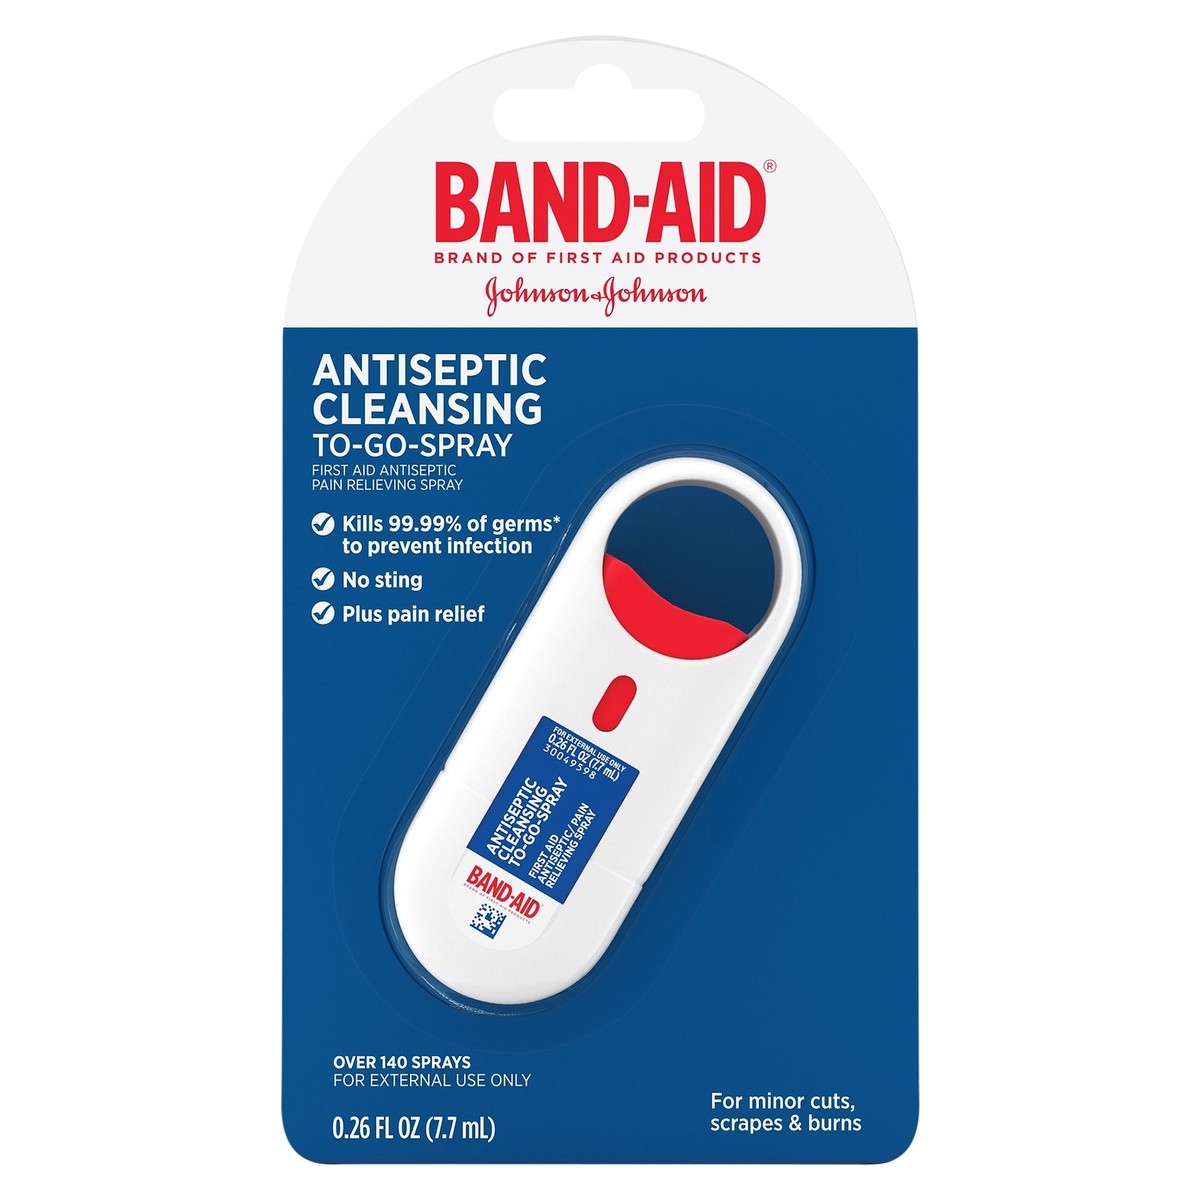 slide 1 of 7, BAND-AID Antiseptic Cleansing To-Go-Spray, First Aid Antiseptic Spray Relieves Pain & Kills Germs Anywhere, Benzalkonium Cl Antiseptic & Pramoxine HCl Topical Analgesic,.26 fl. oz, 0.26 fl oz